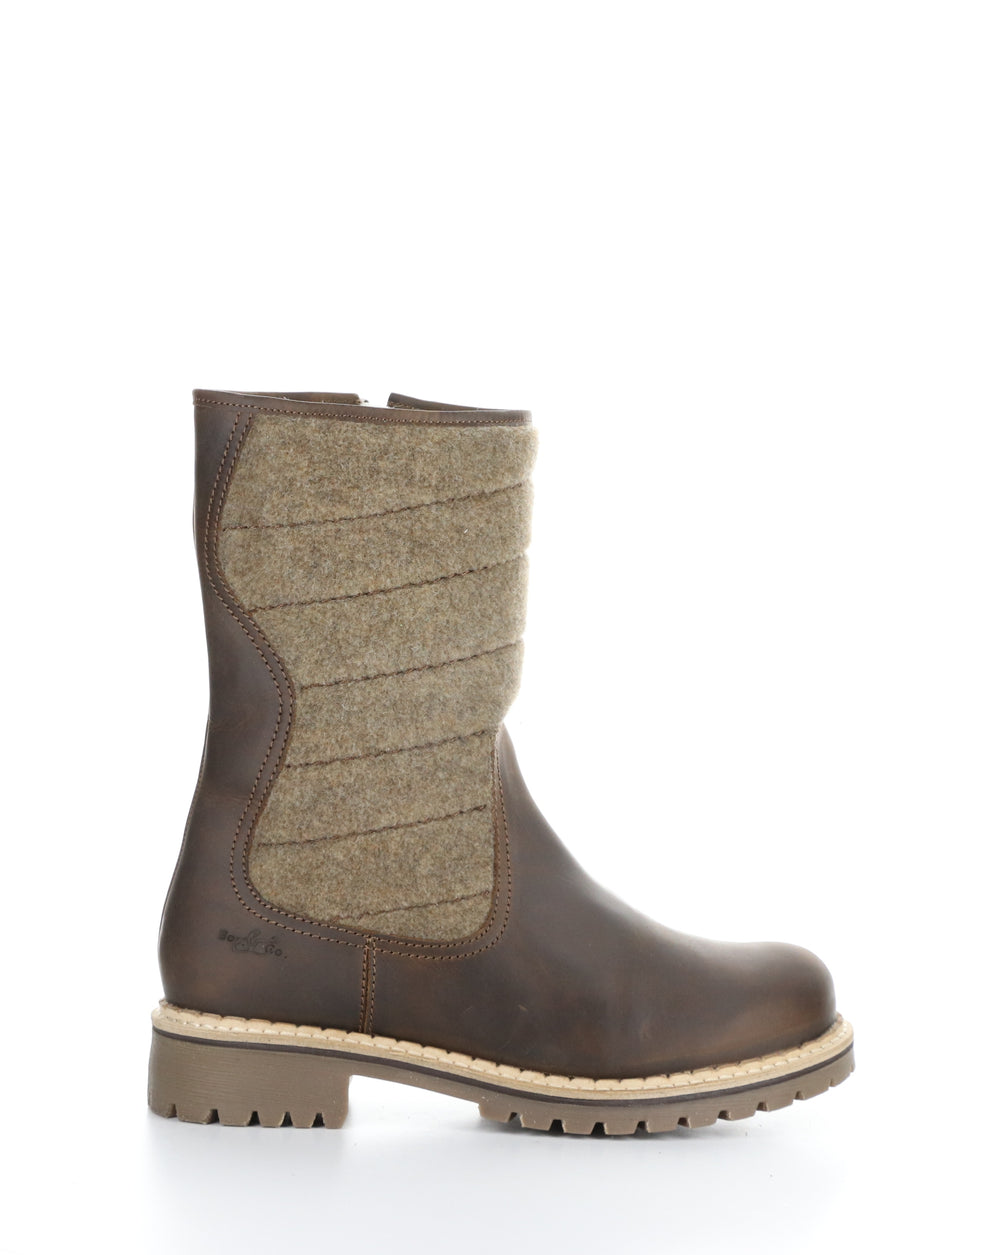 HARLYN CAMEL/BEIGE Round Toe Boots